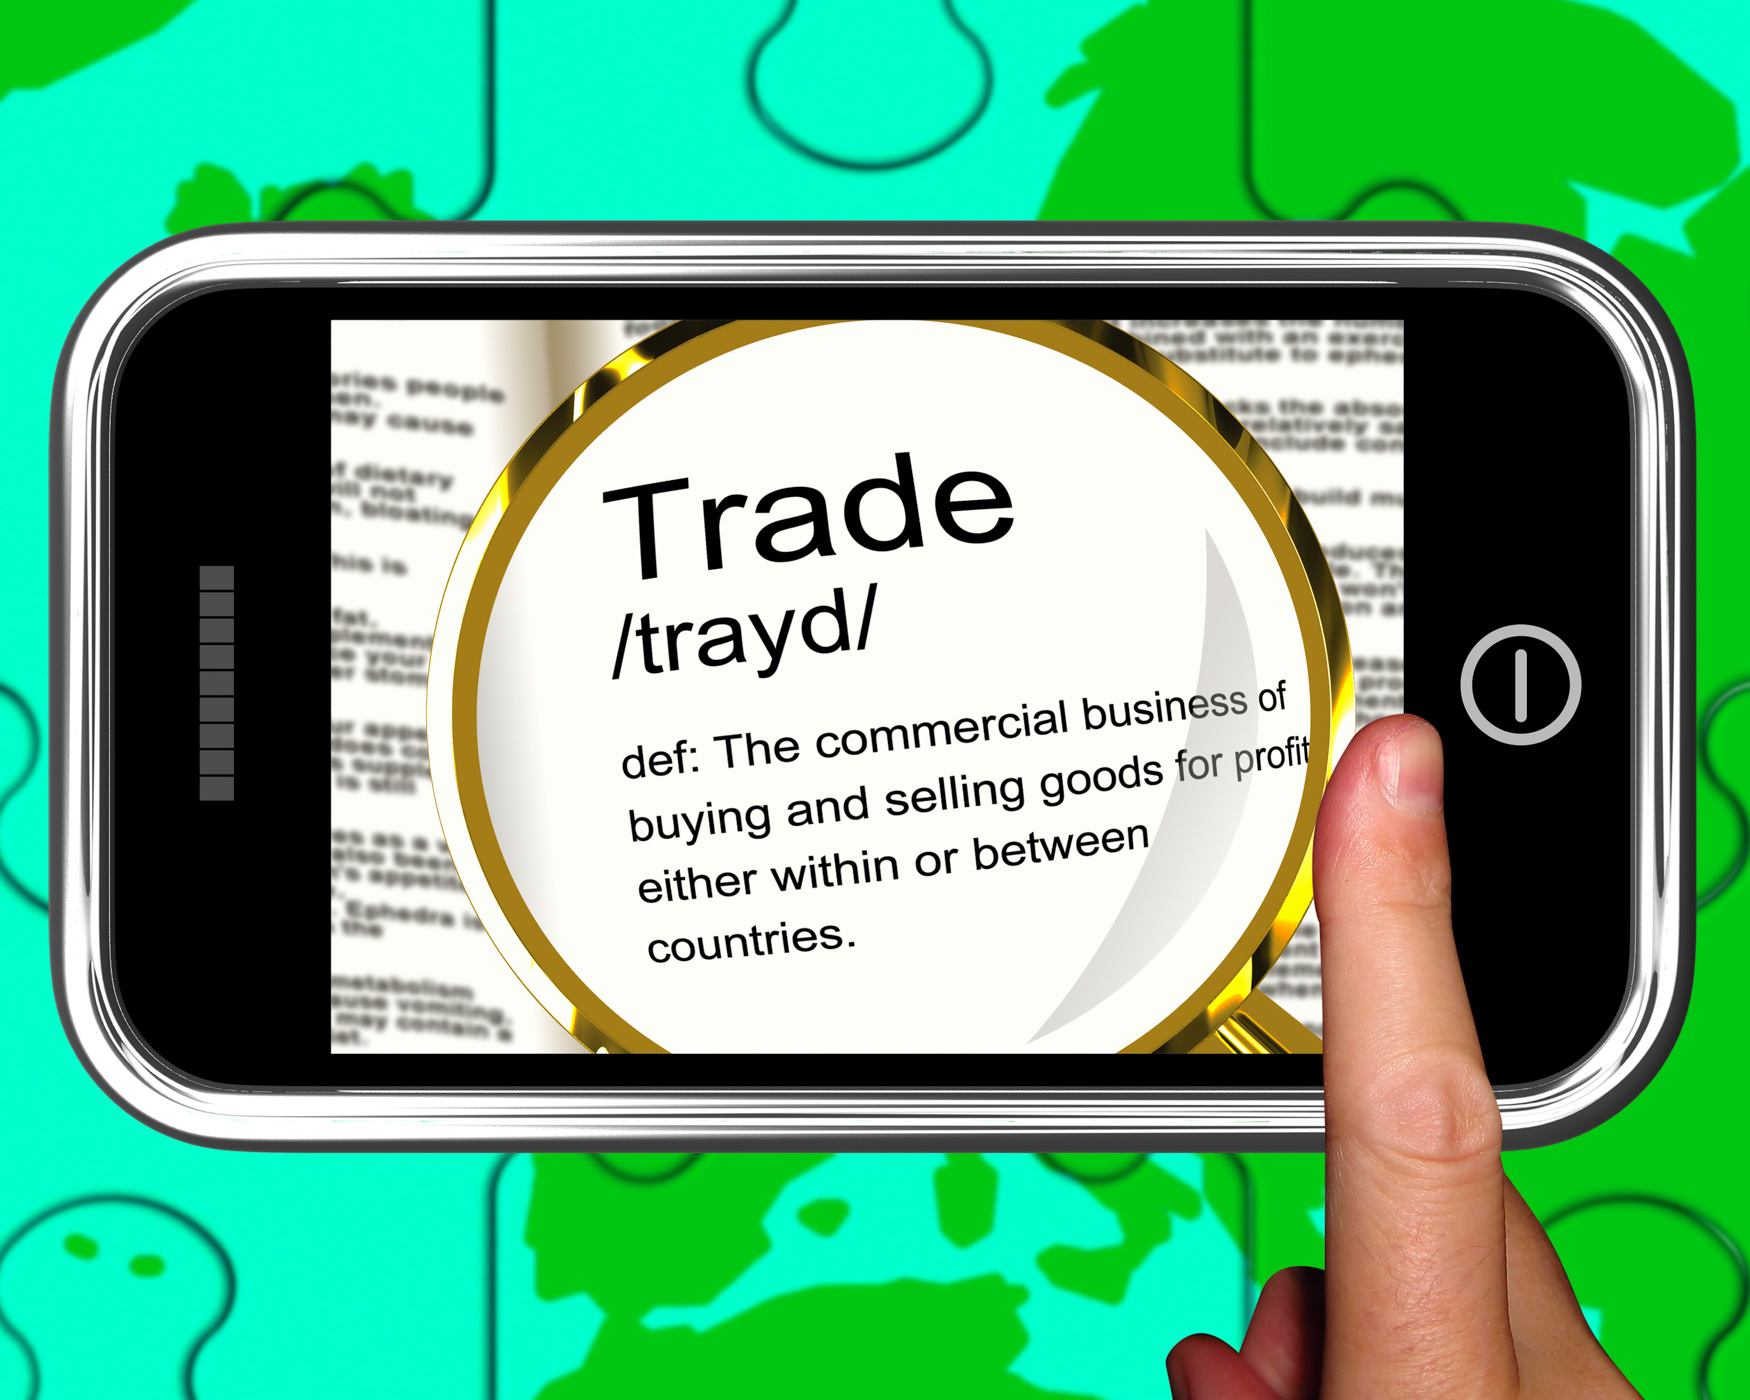 Trade definition on smartphone showing exportation photo